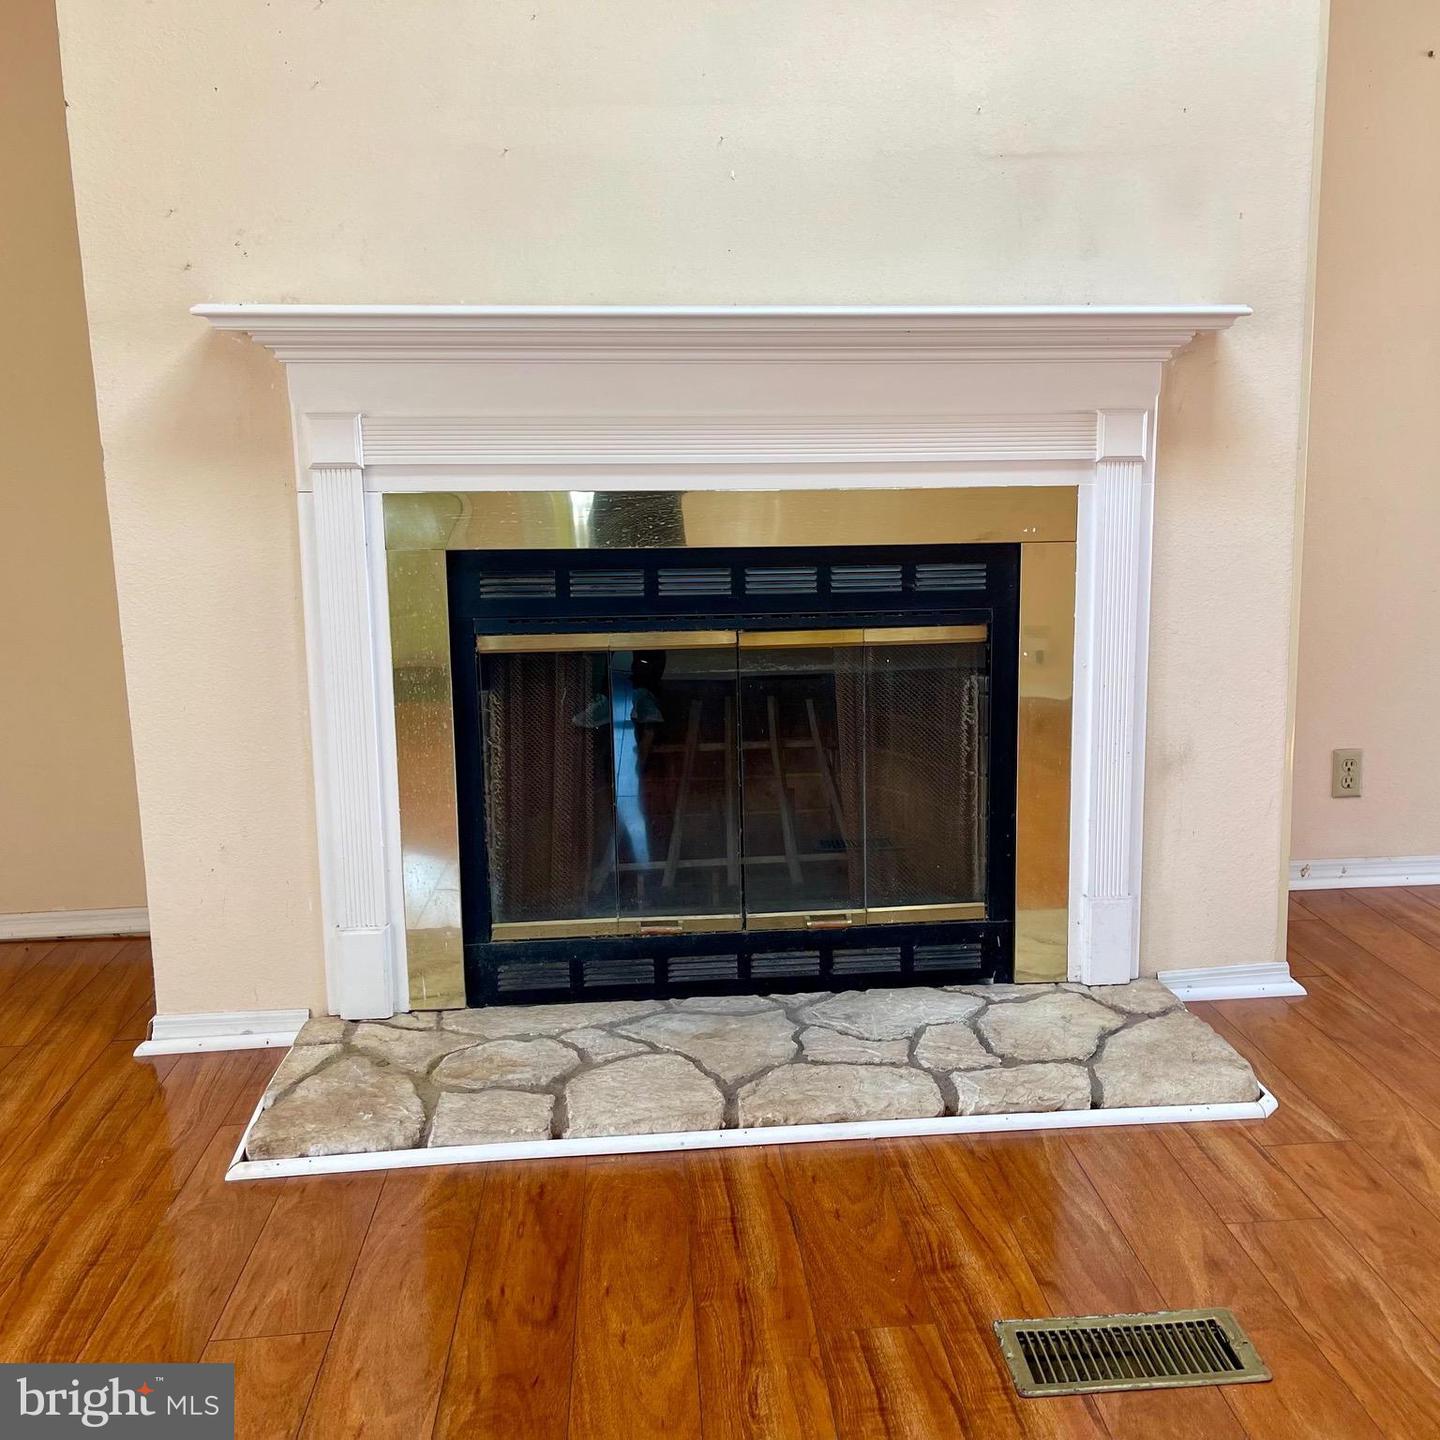 MDWO2019962-802957767056-2024-03-29-19-05-24 10 Ensign Dr | Berlin, MD Real Estate For Sale | MLS# Mdwo2019962  - 1st Choice Properties